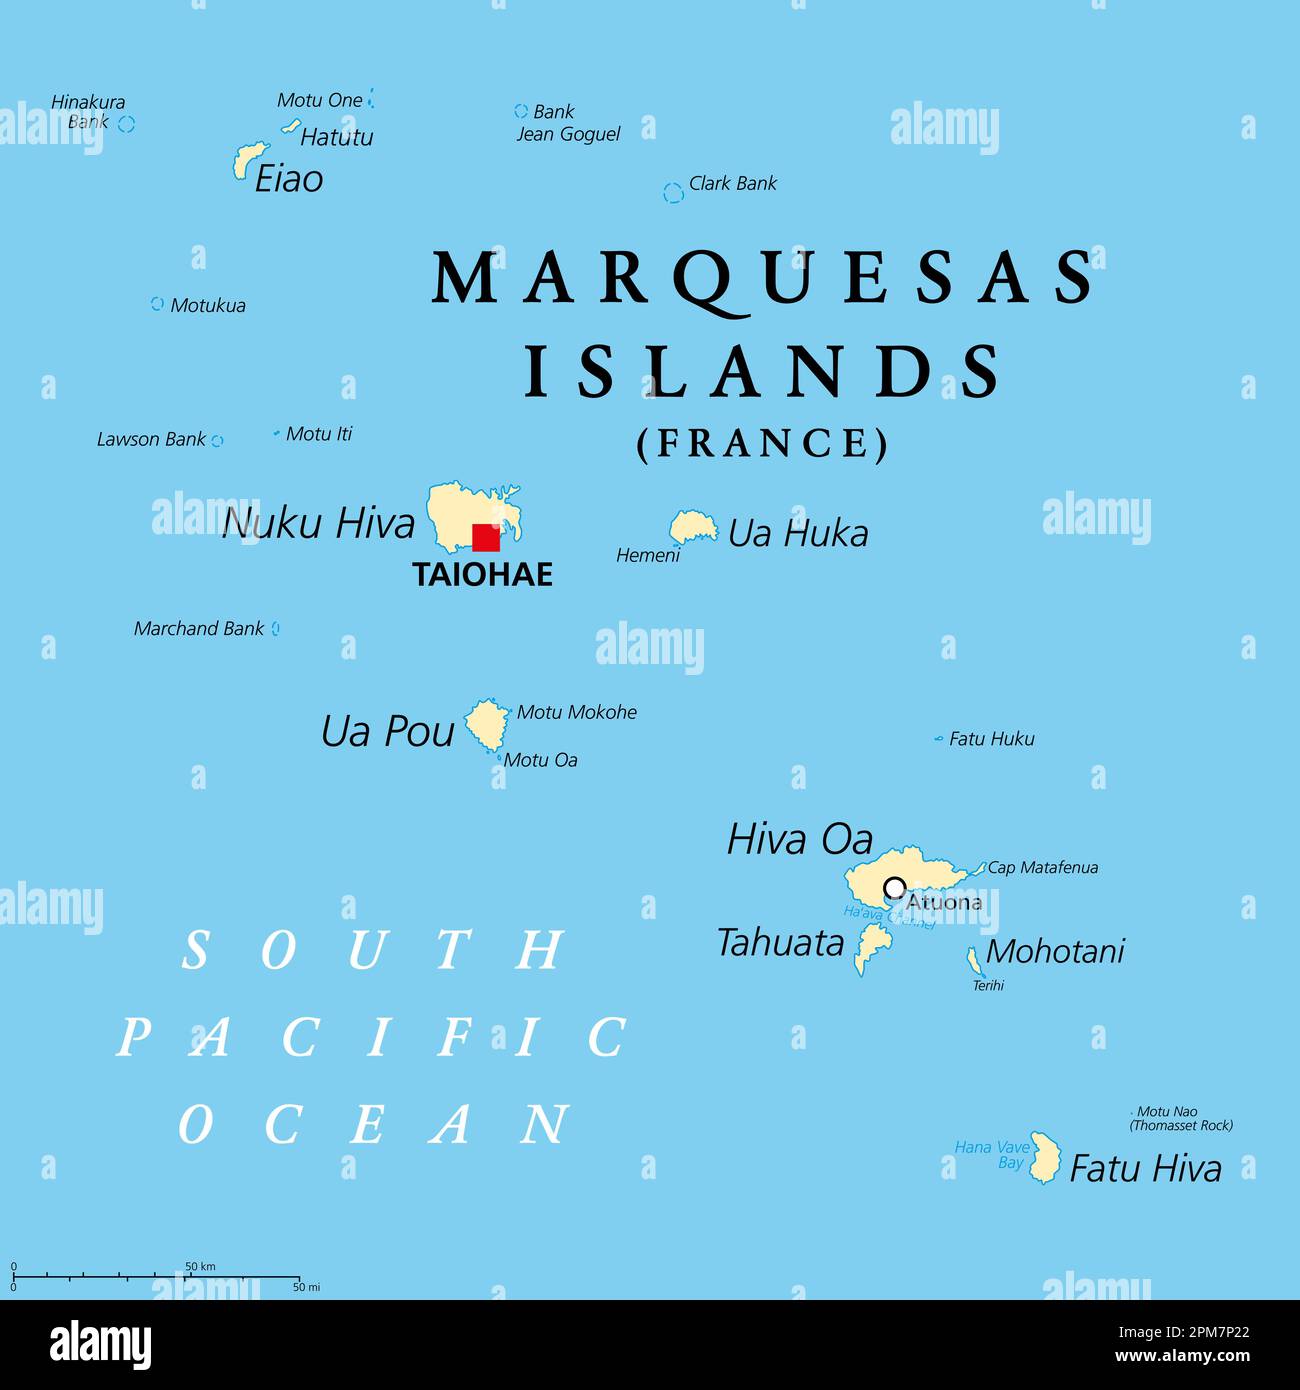 Marquesas Islands, political map. Group of volcanic islands, in French Polynesia, an overseas collectivity of France, in the South Pacific Ocean. Stock Photo